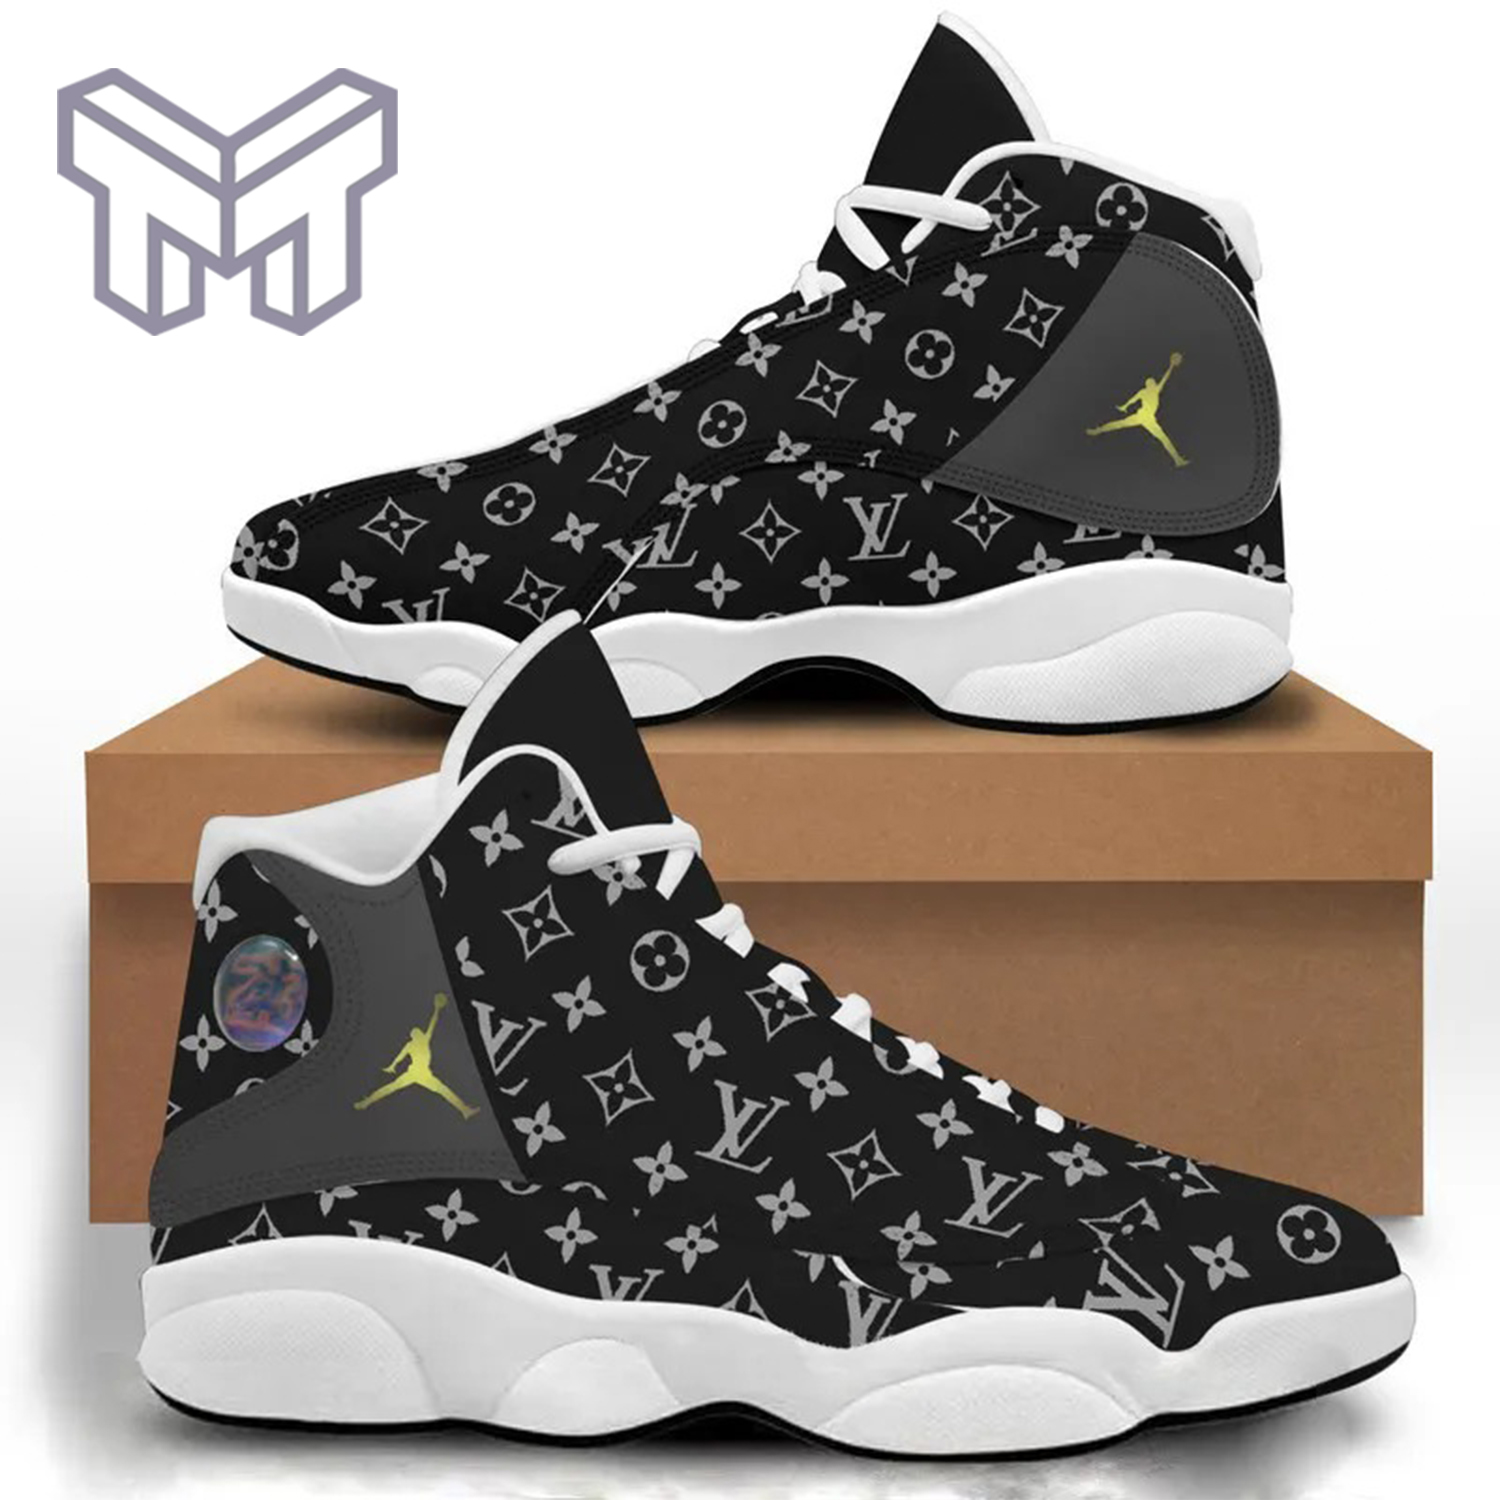 NEW FASHION] Louis Vuitton Black Grey Air Jordan 11 Sneakers Shoes Hot 2023  LV Gifts For